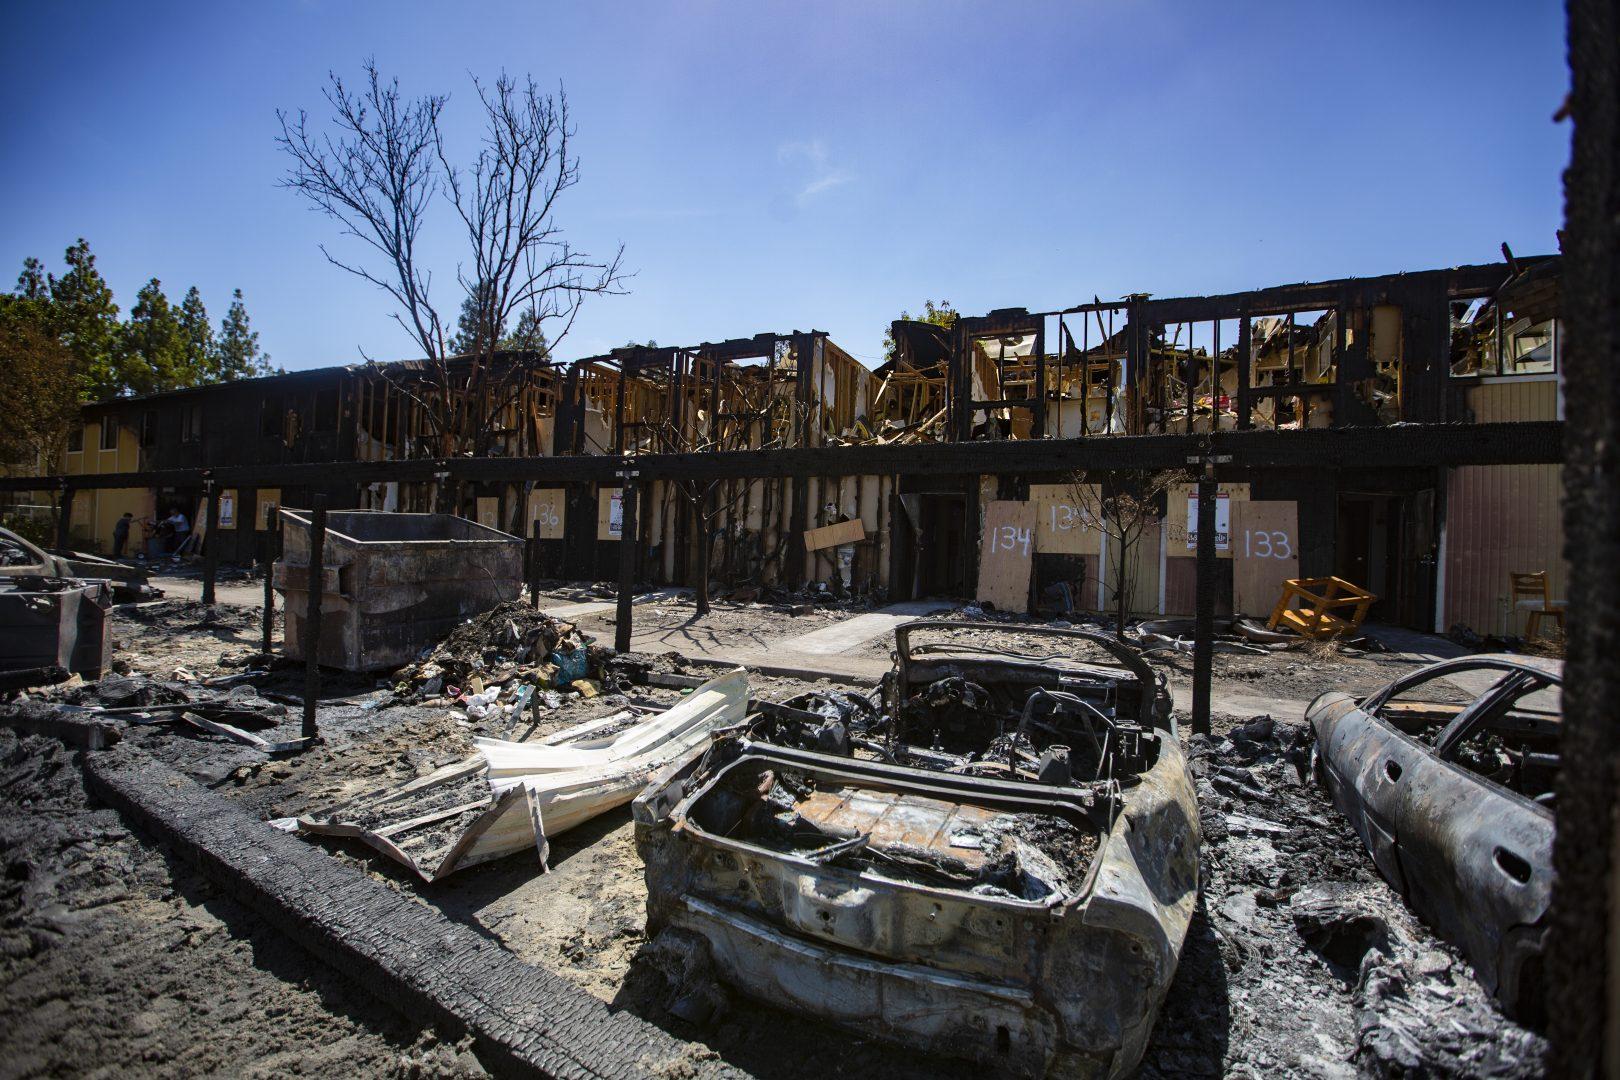 Aftermath+of+a+blaze+at+Maplewood+Apartment+Complex+across+from+Fresno+State+on+Friday%2C+Aug.+23%2C+2019.+At+least+15+students+were+displaced+and+eight+units+in+the+complex+were+destroyed.+%28Larry+Valenzuela%2FThe+Collegian%29